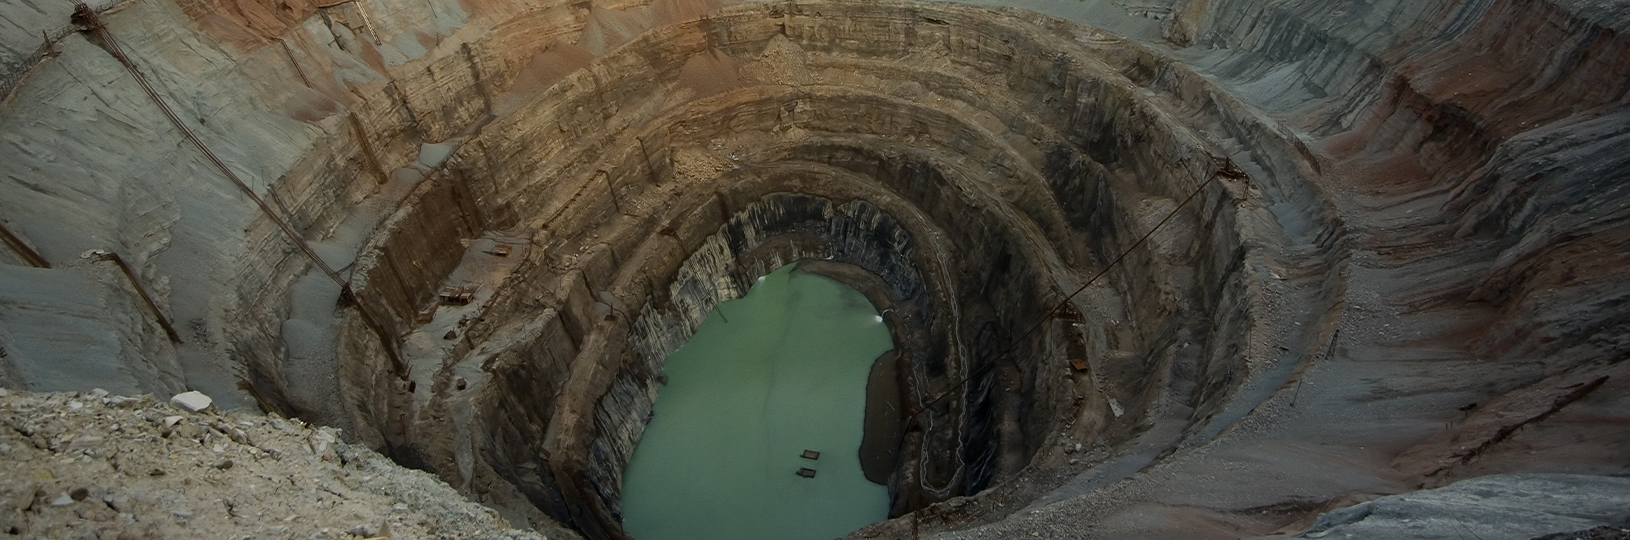 An aerial image of an open-pit mine